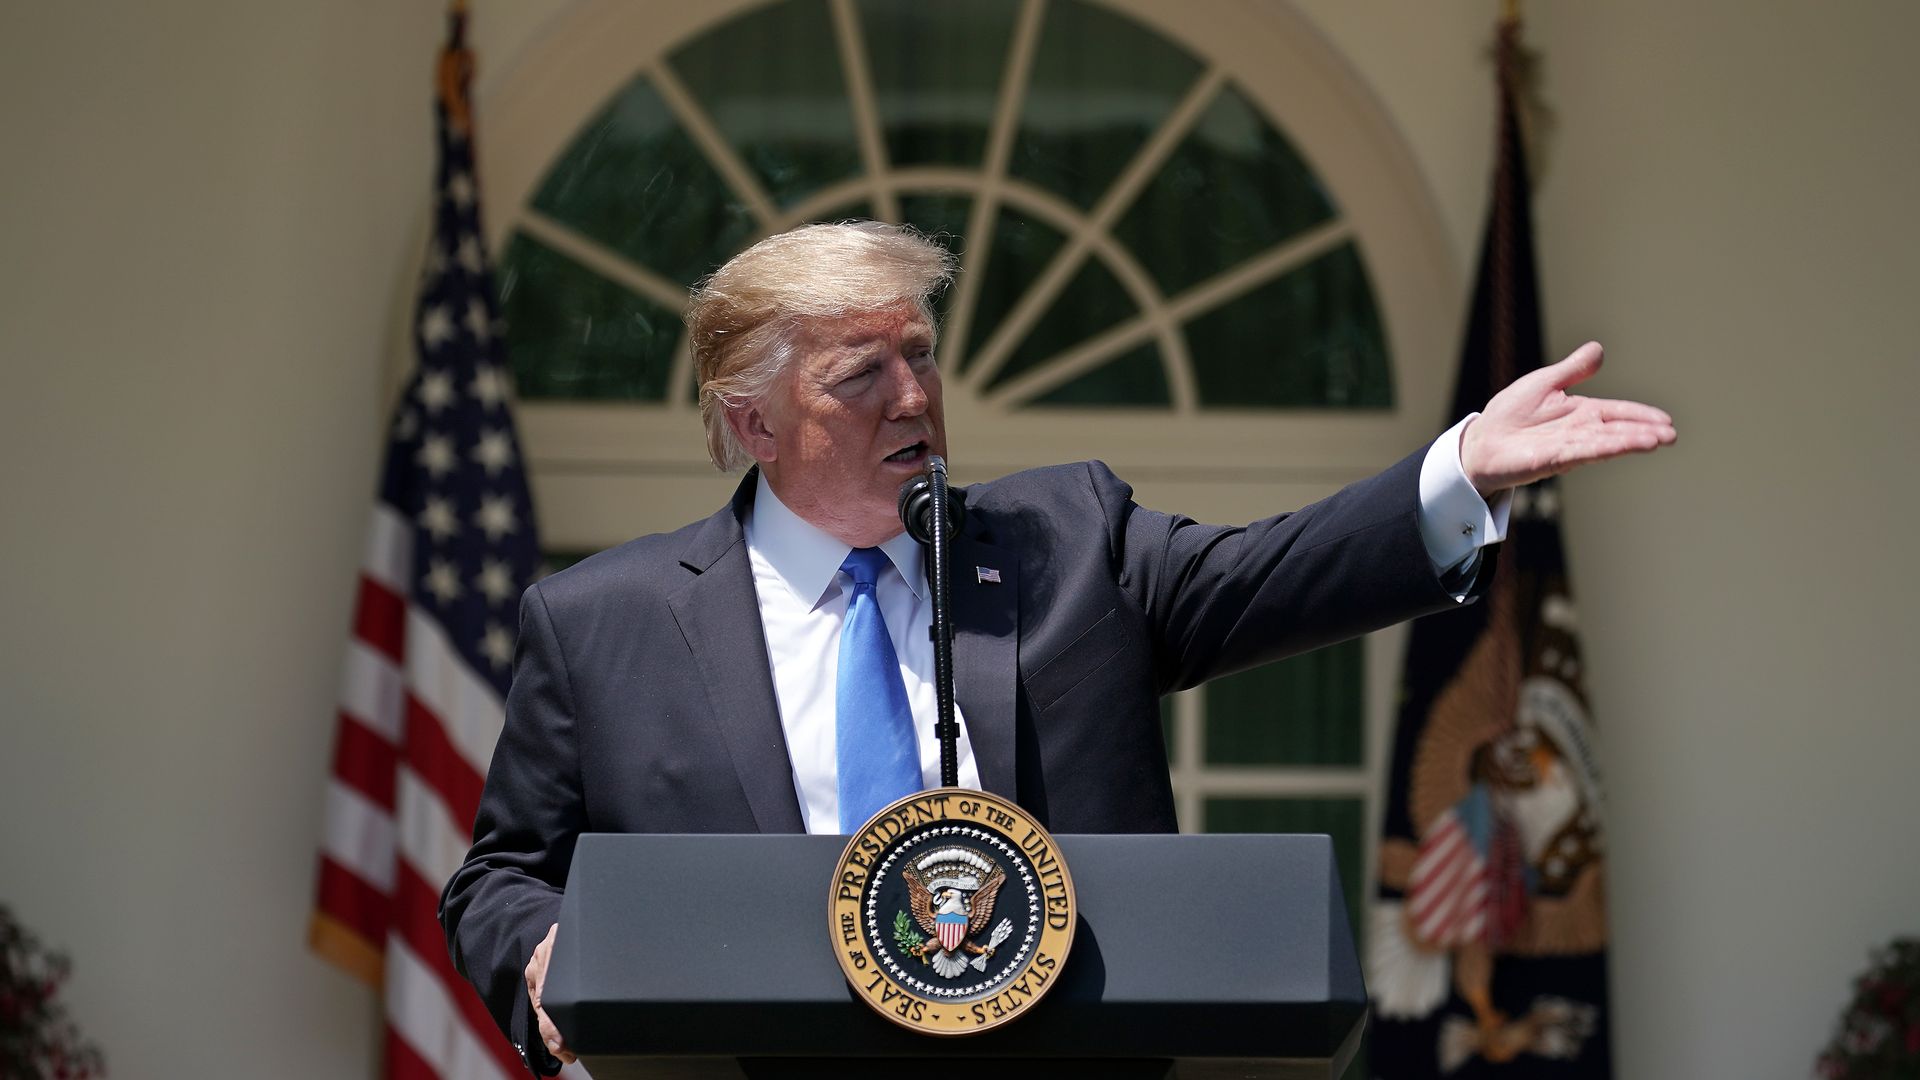 In this image, Trump gestures to the right while standing behind a podium.